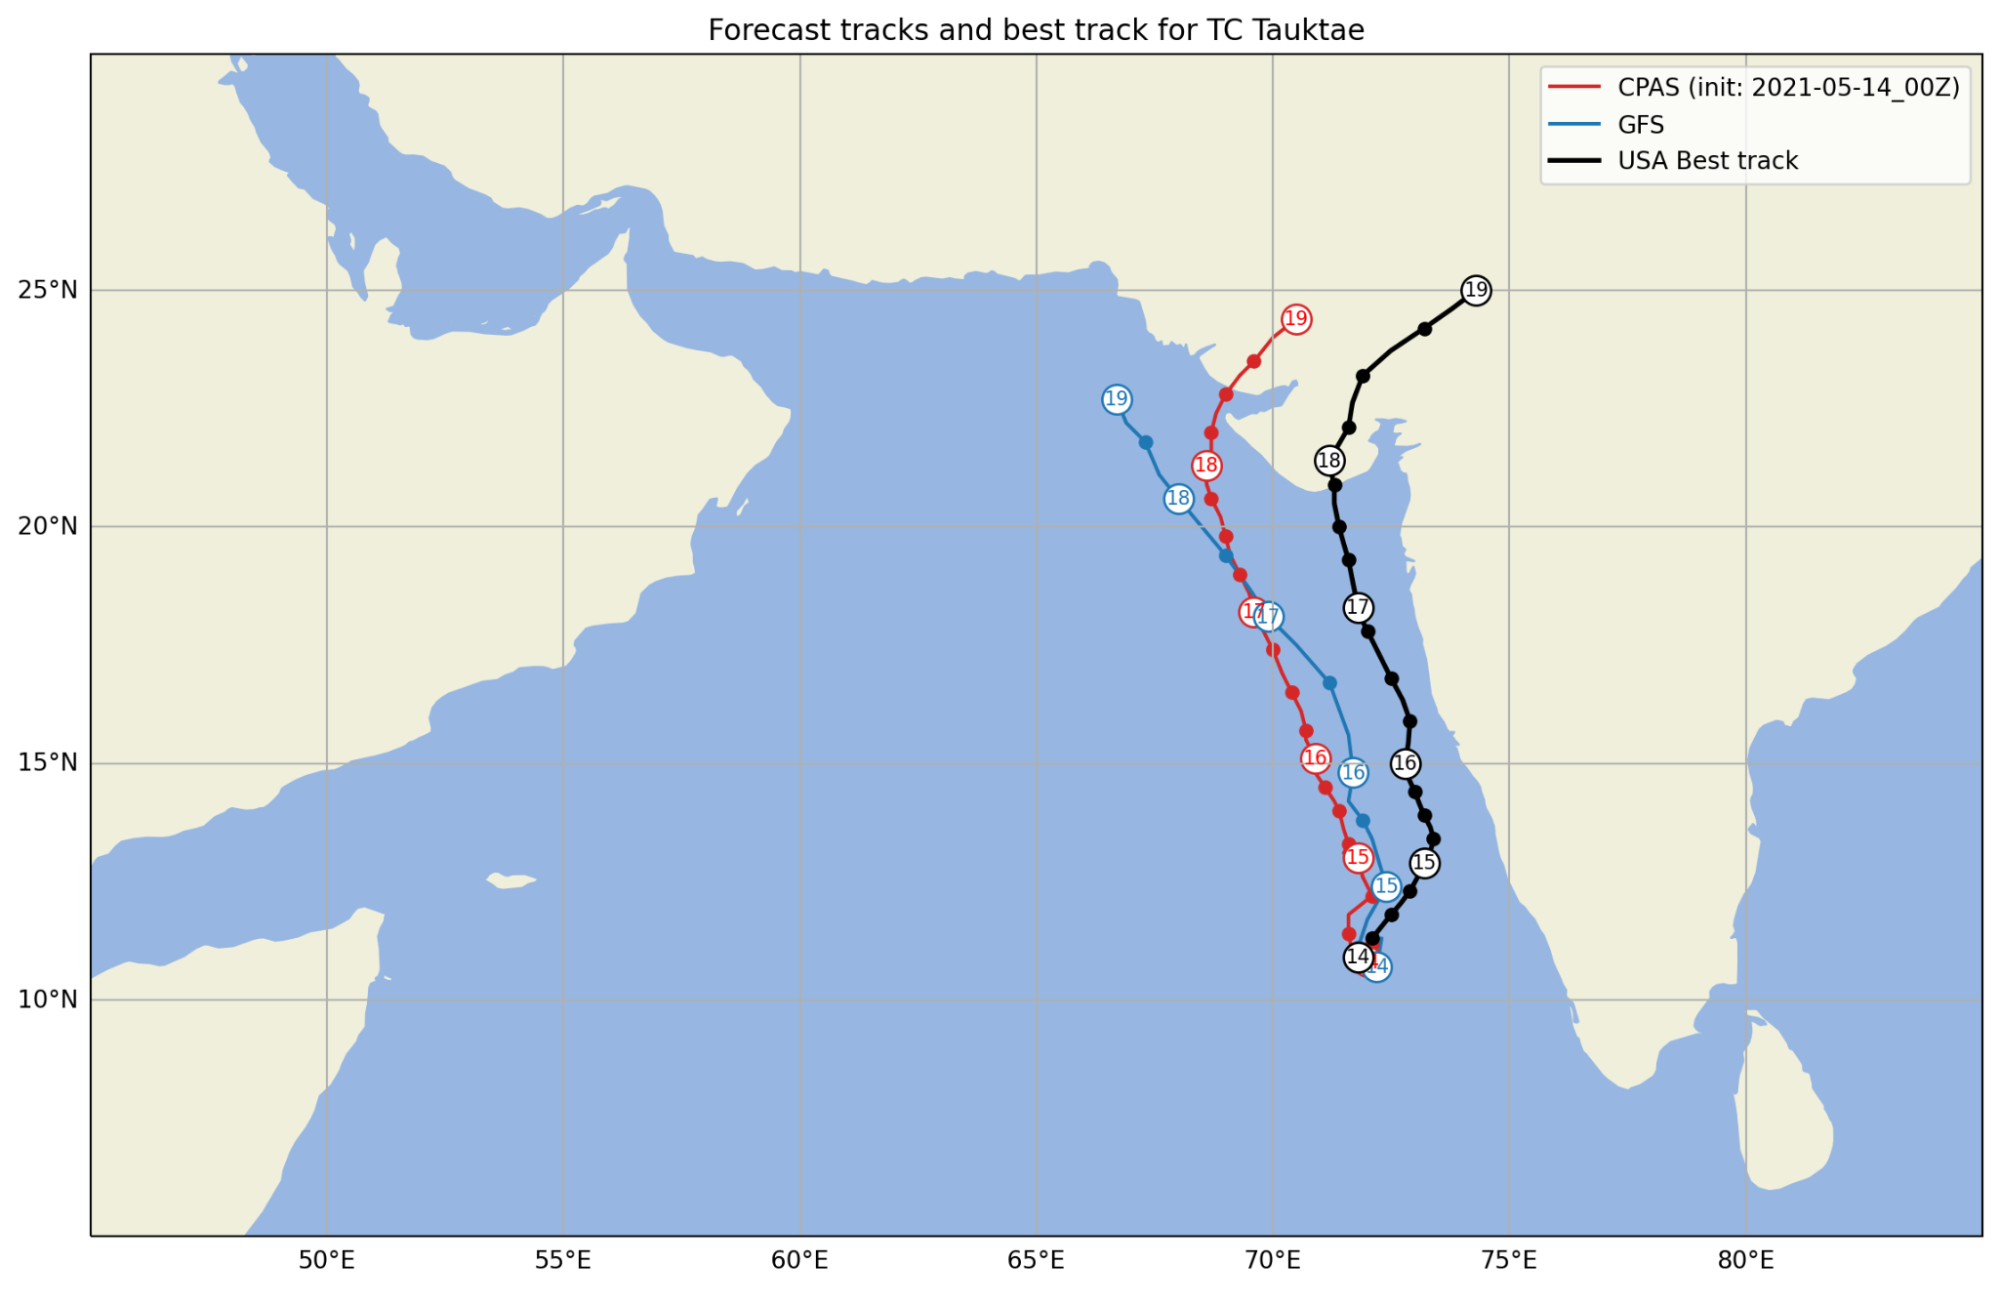 Fig. 2 Predicted tracks by CPAS and GFS and NOAA Best Track of Cyclone Tauktae